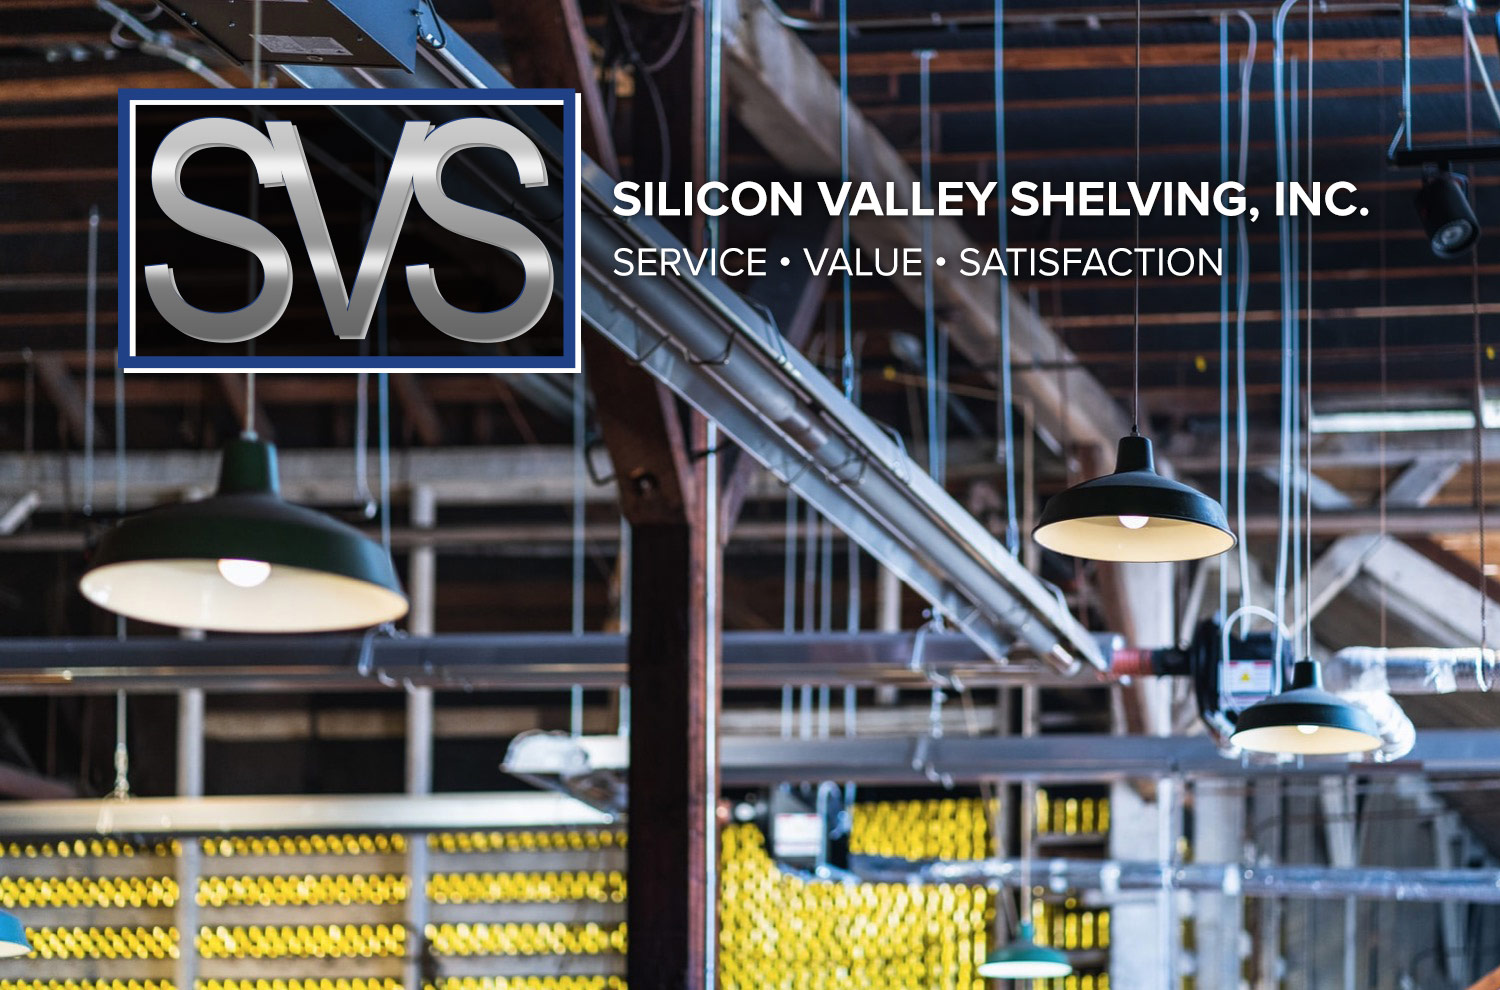 Image of A warehouse with SVS logo